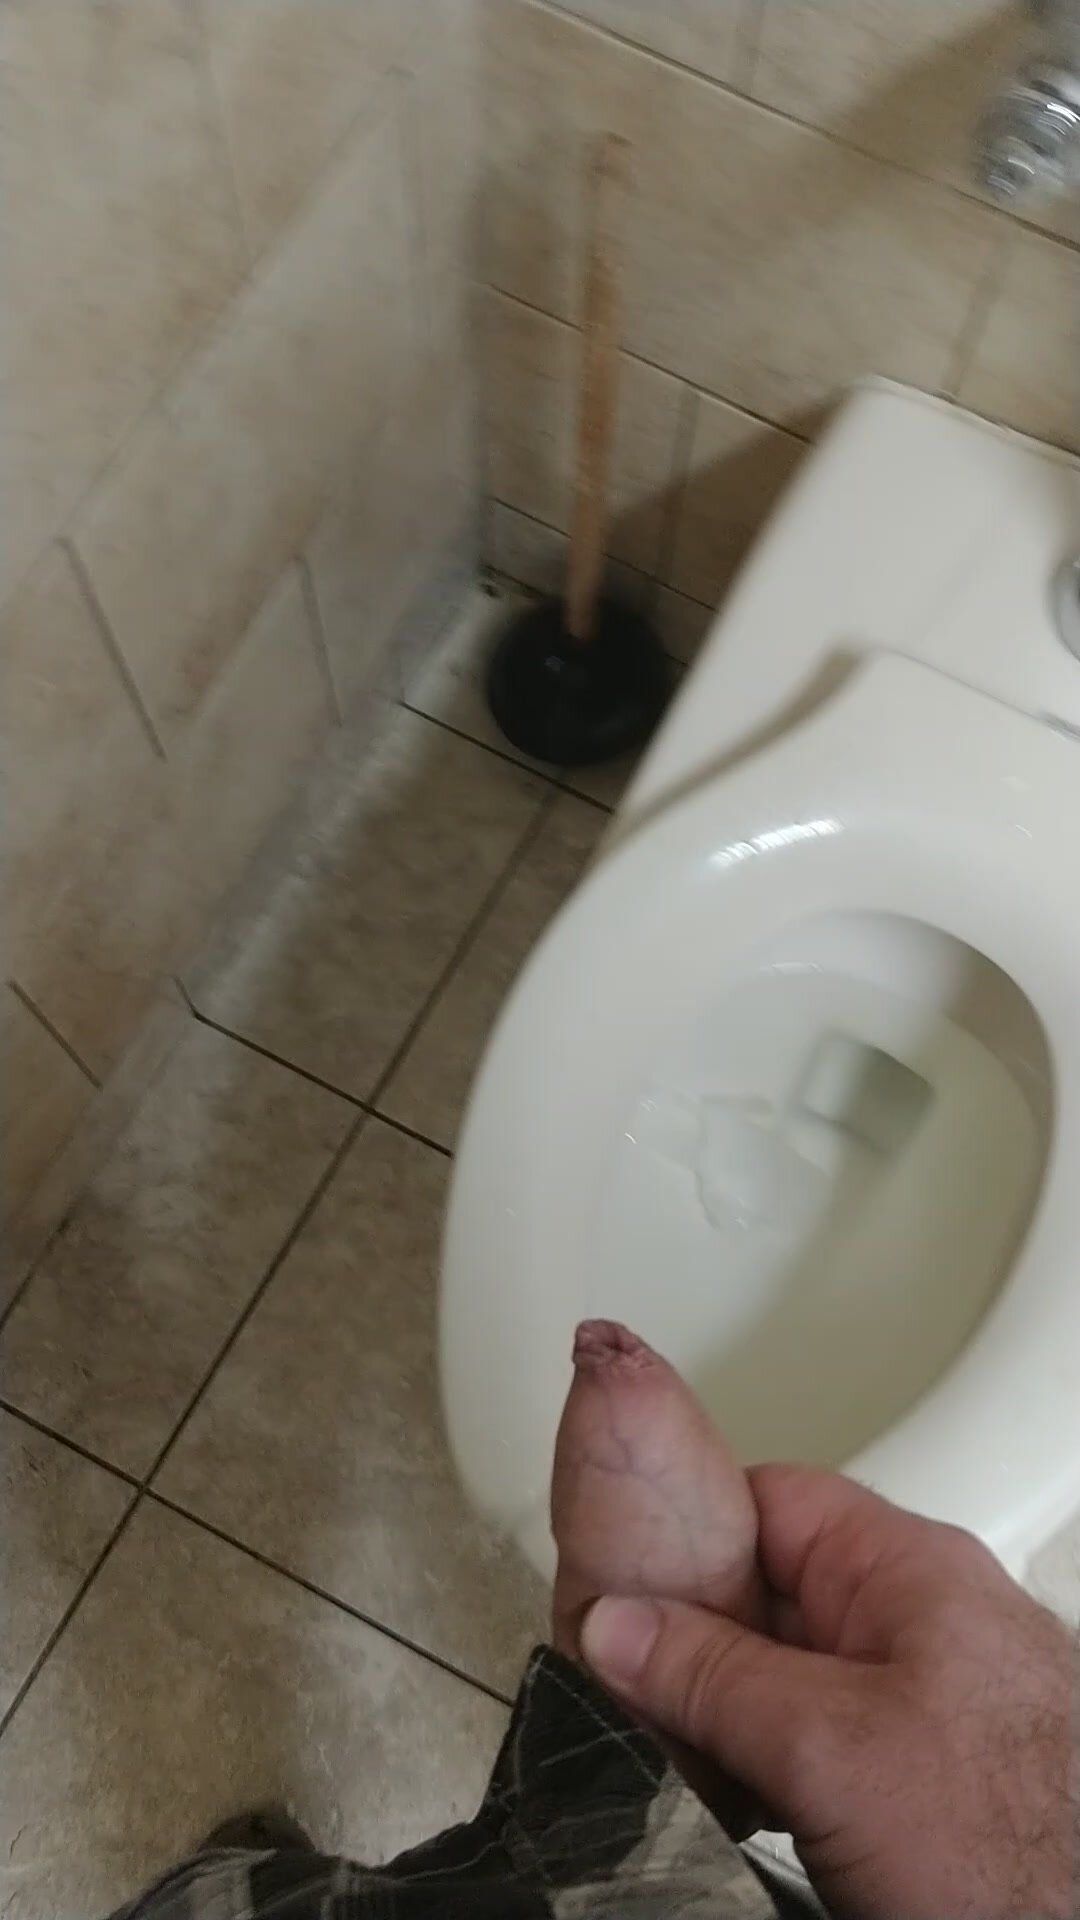 Messy toilet piss, soaking plunger and railing